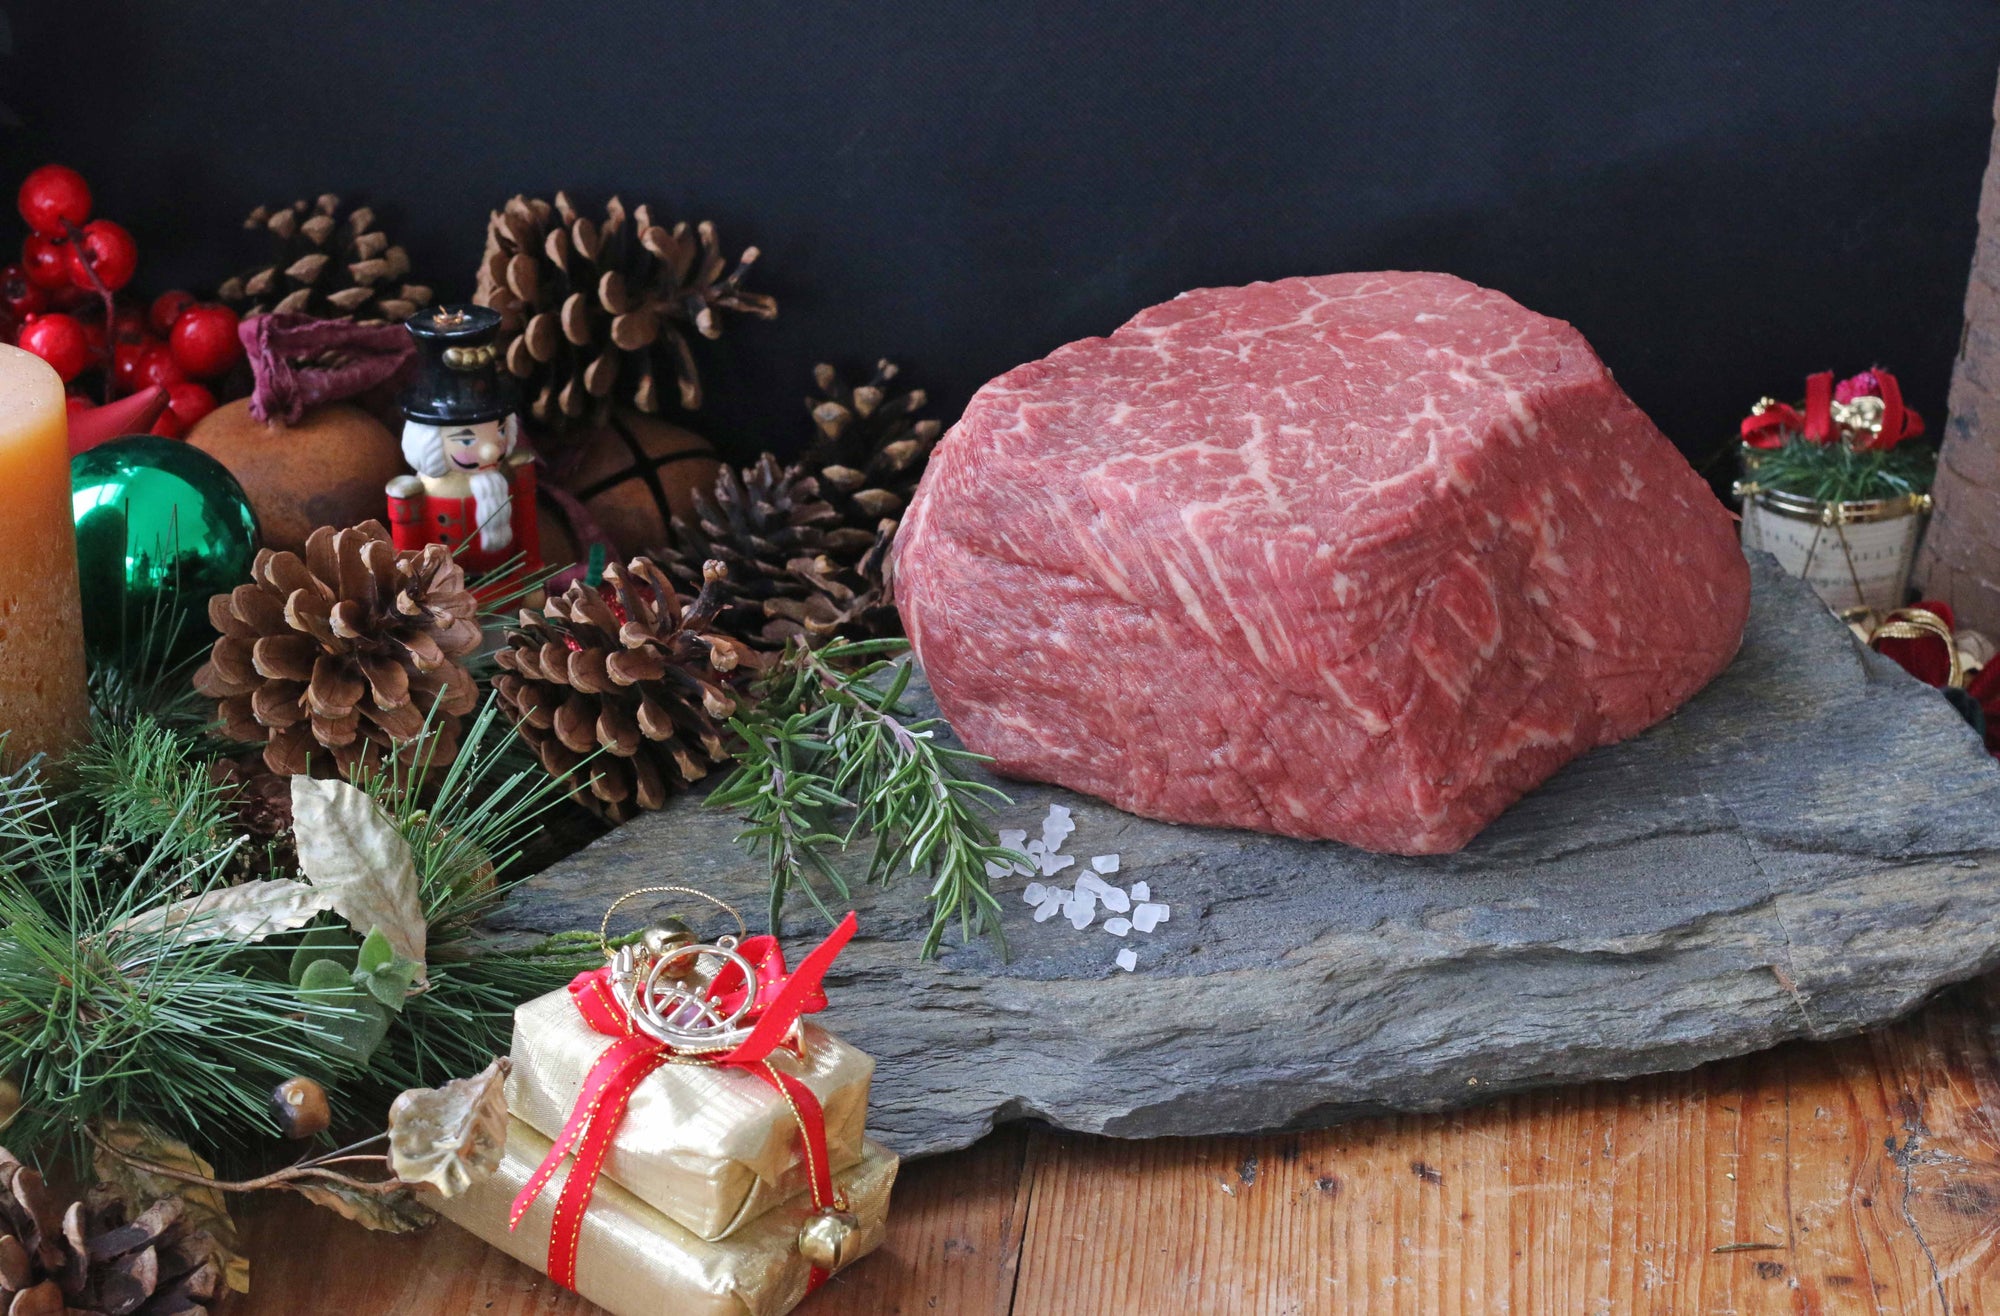 How to Serve 100% Full-Blood Wagyu Beef for the Holidays